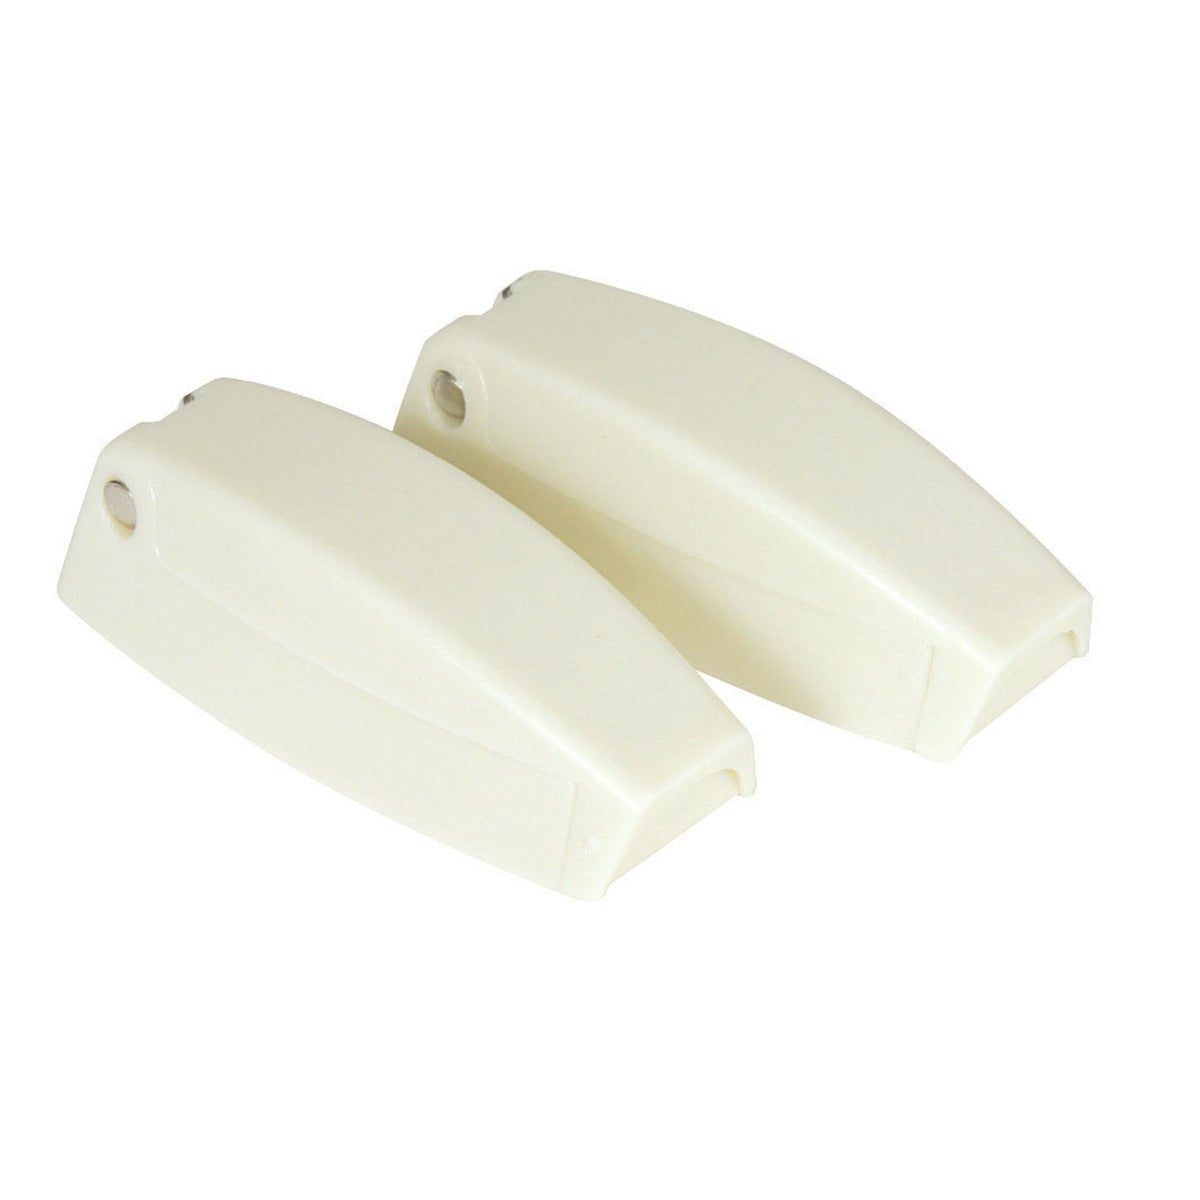 Camco Qualifies for Free Shipping Camco Door Catch Colonial White 2-pk #44163